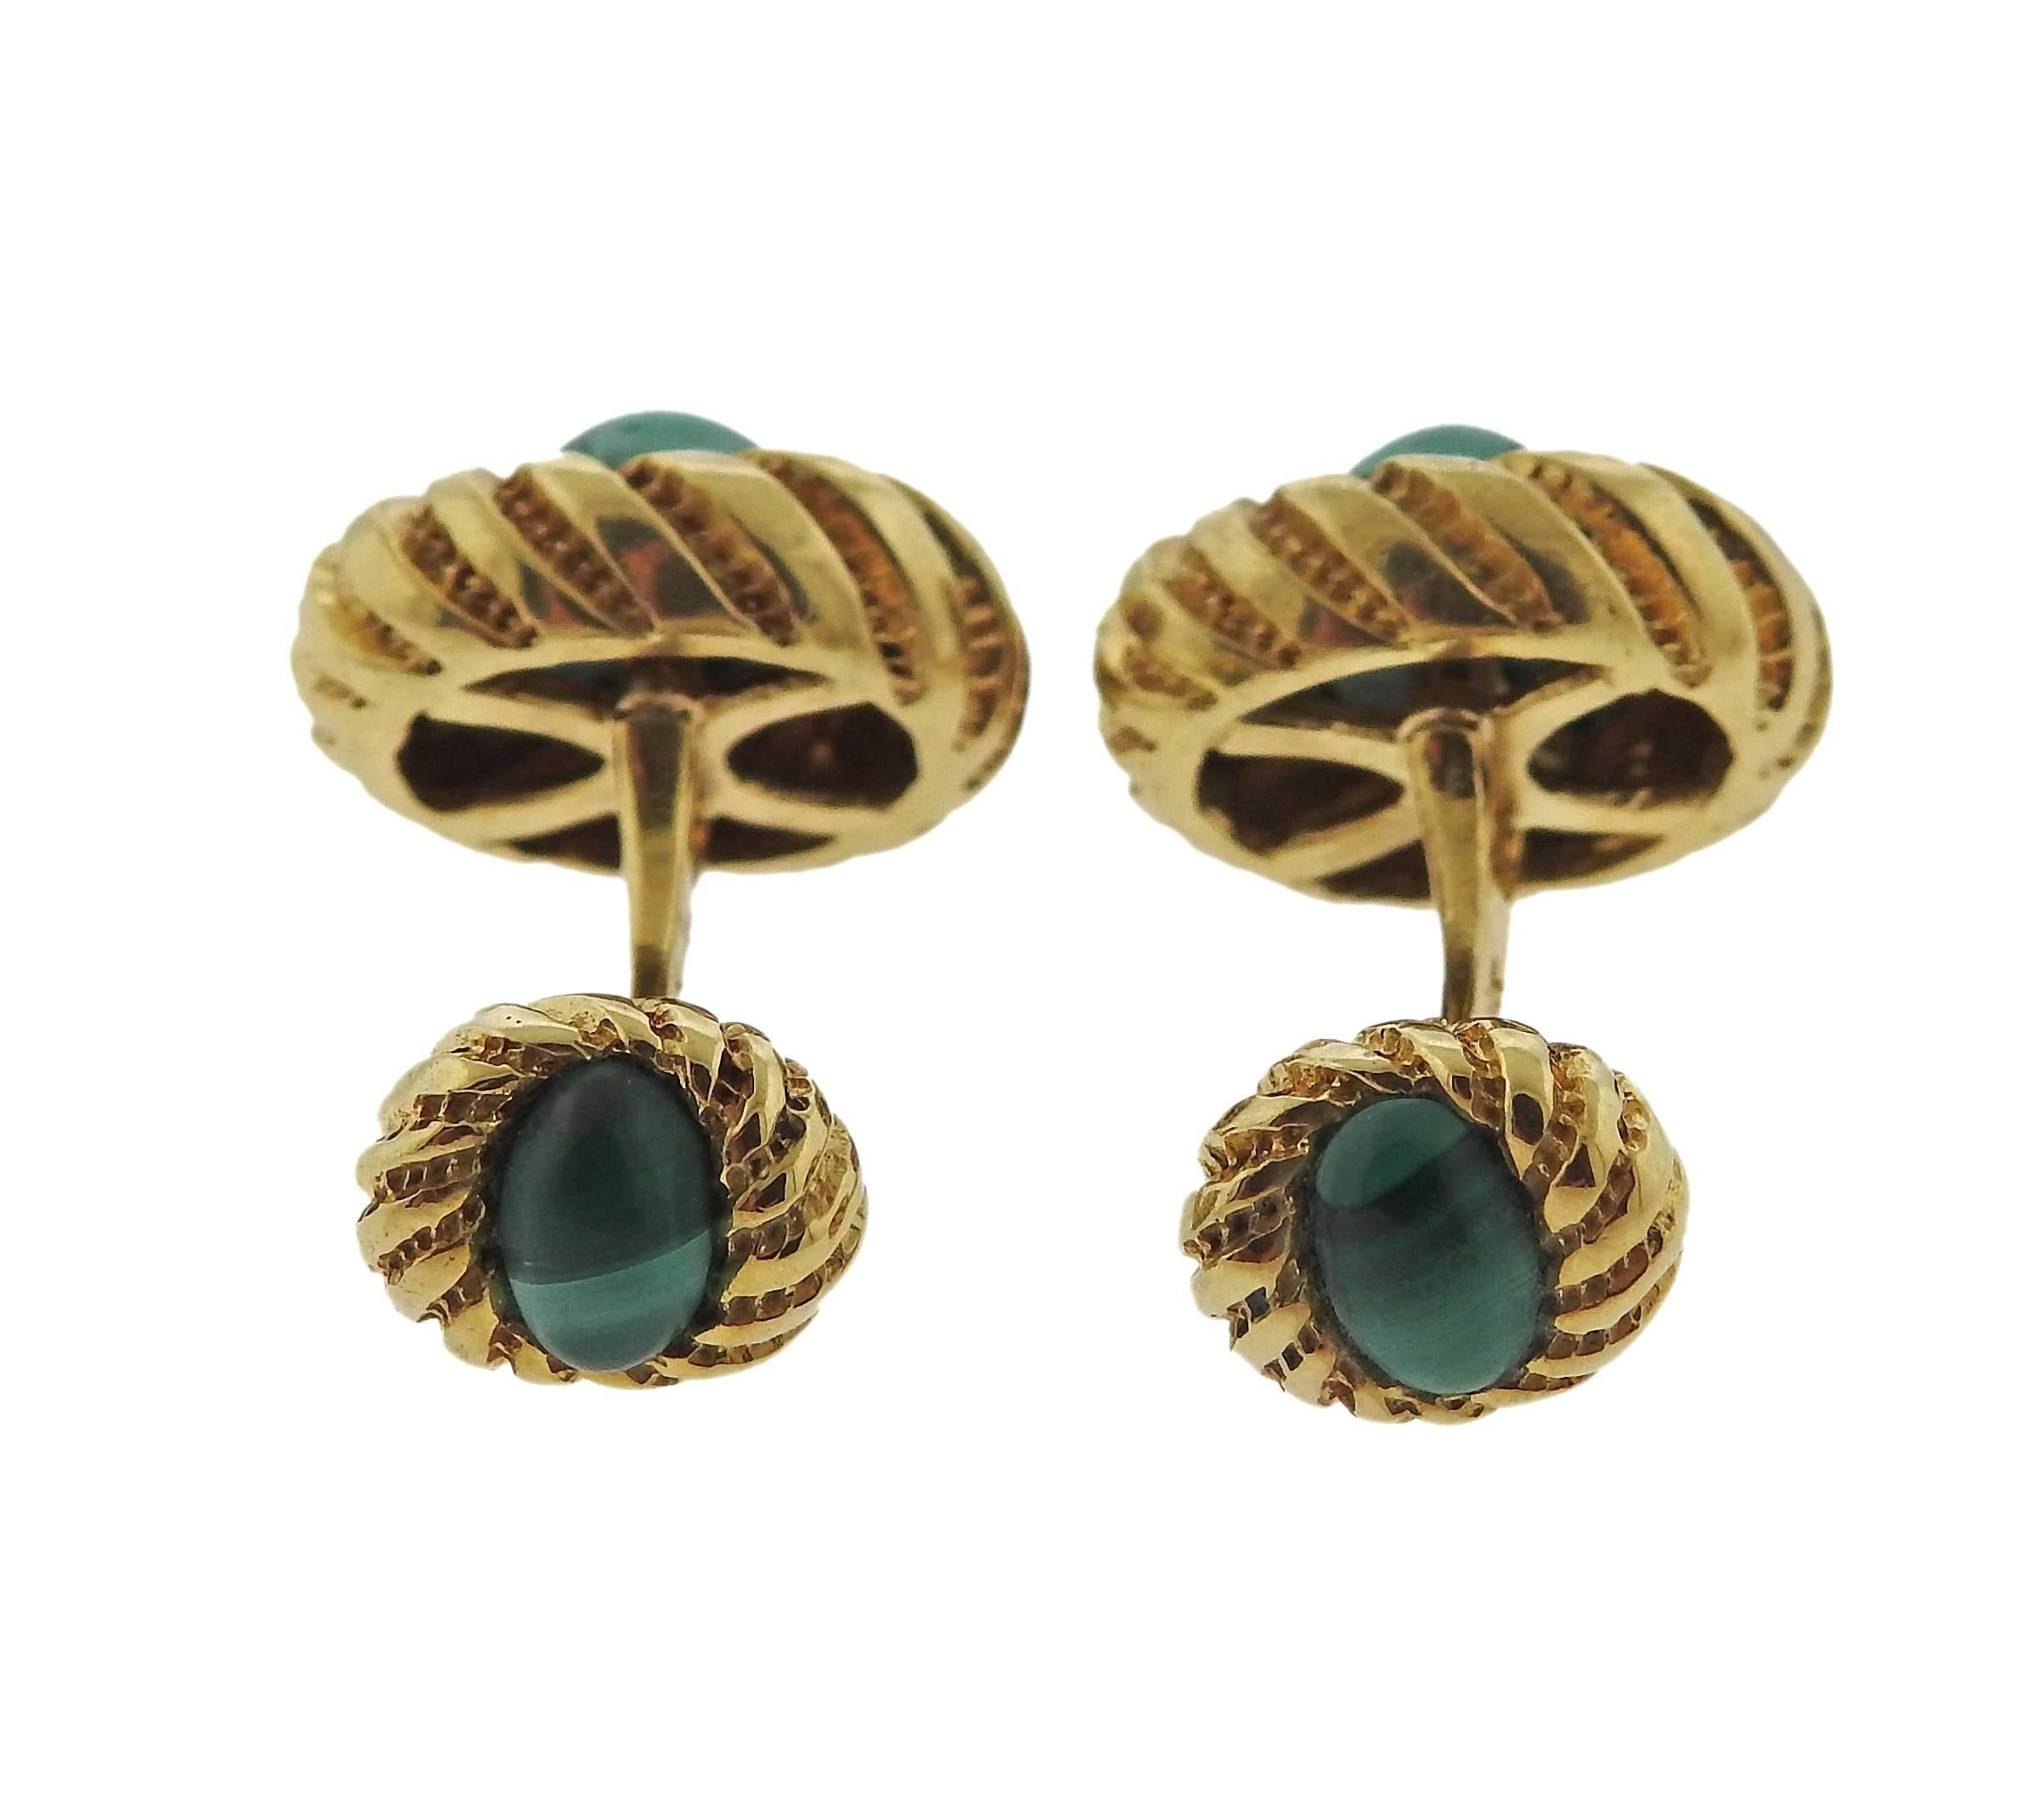 Tiffany & Co. Schlumberger Malachite Gold Cufflinks In Excellent Condition For Sale In Lambertville, NJ